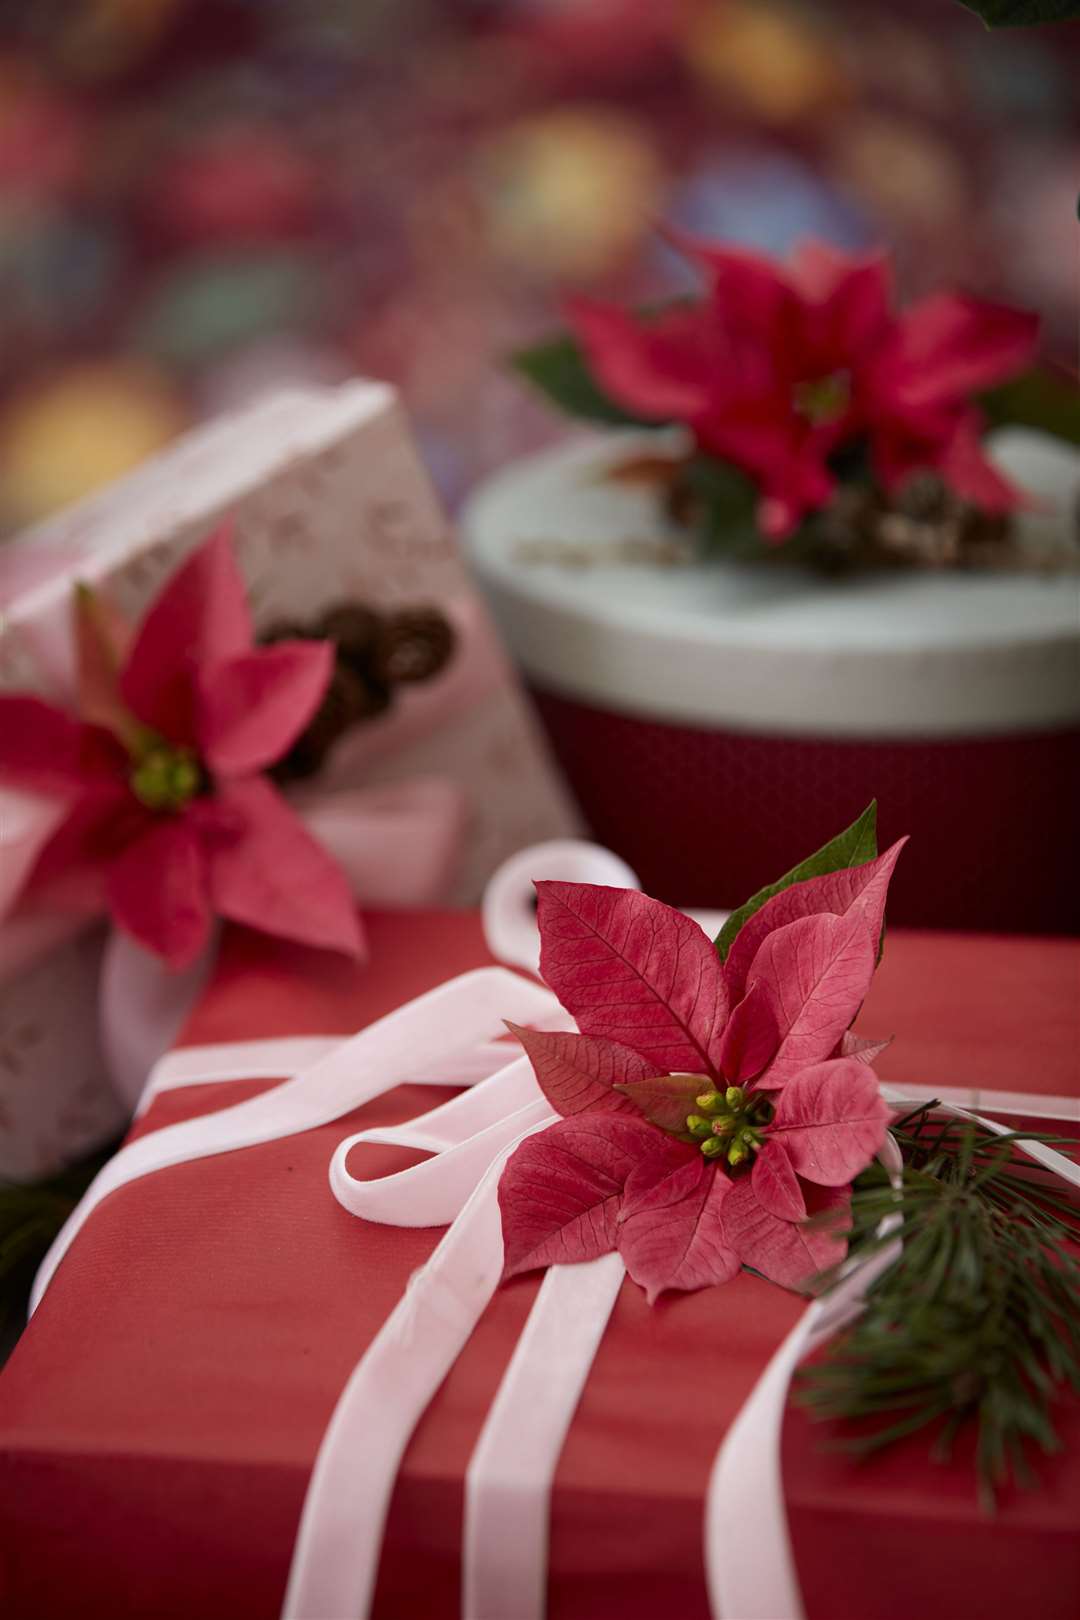 Decorate Christmas presents with poinsettia. Picture: Stars For Europe/PA